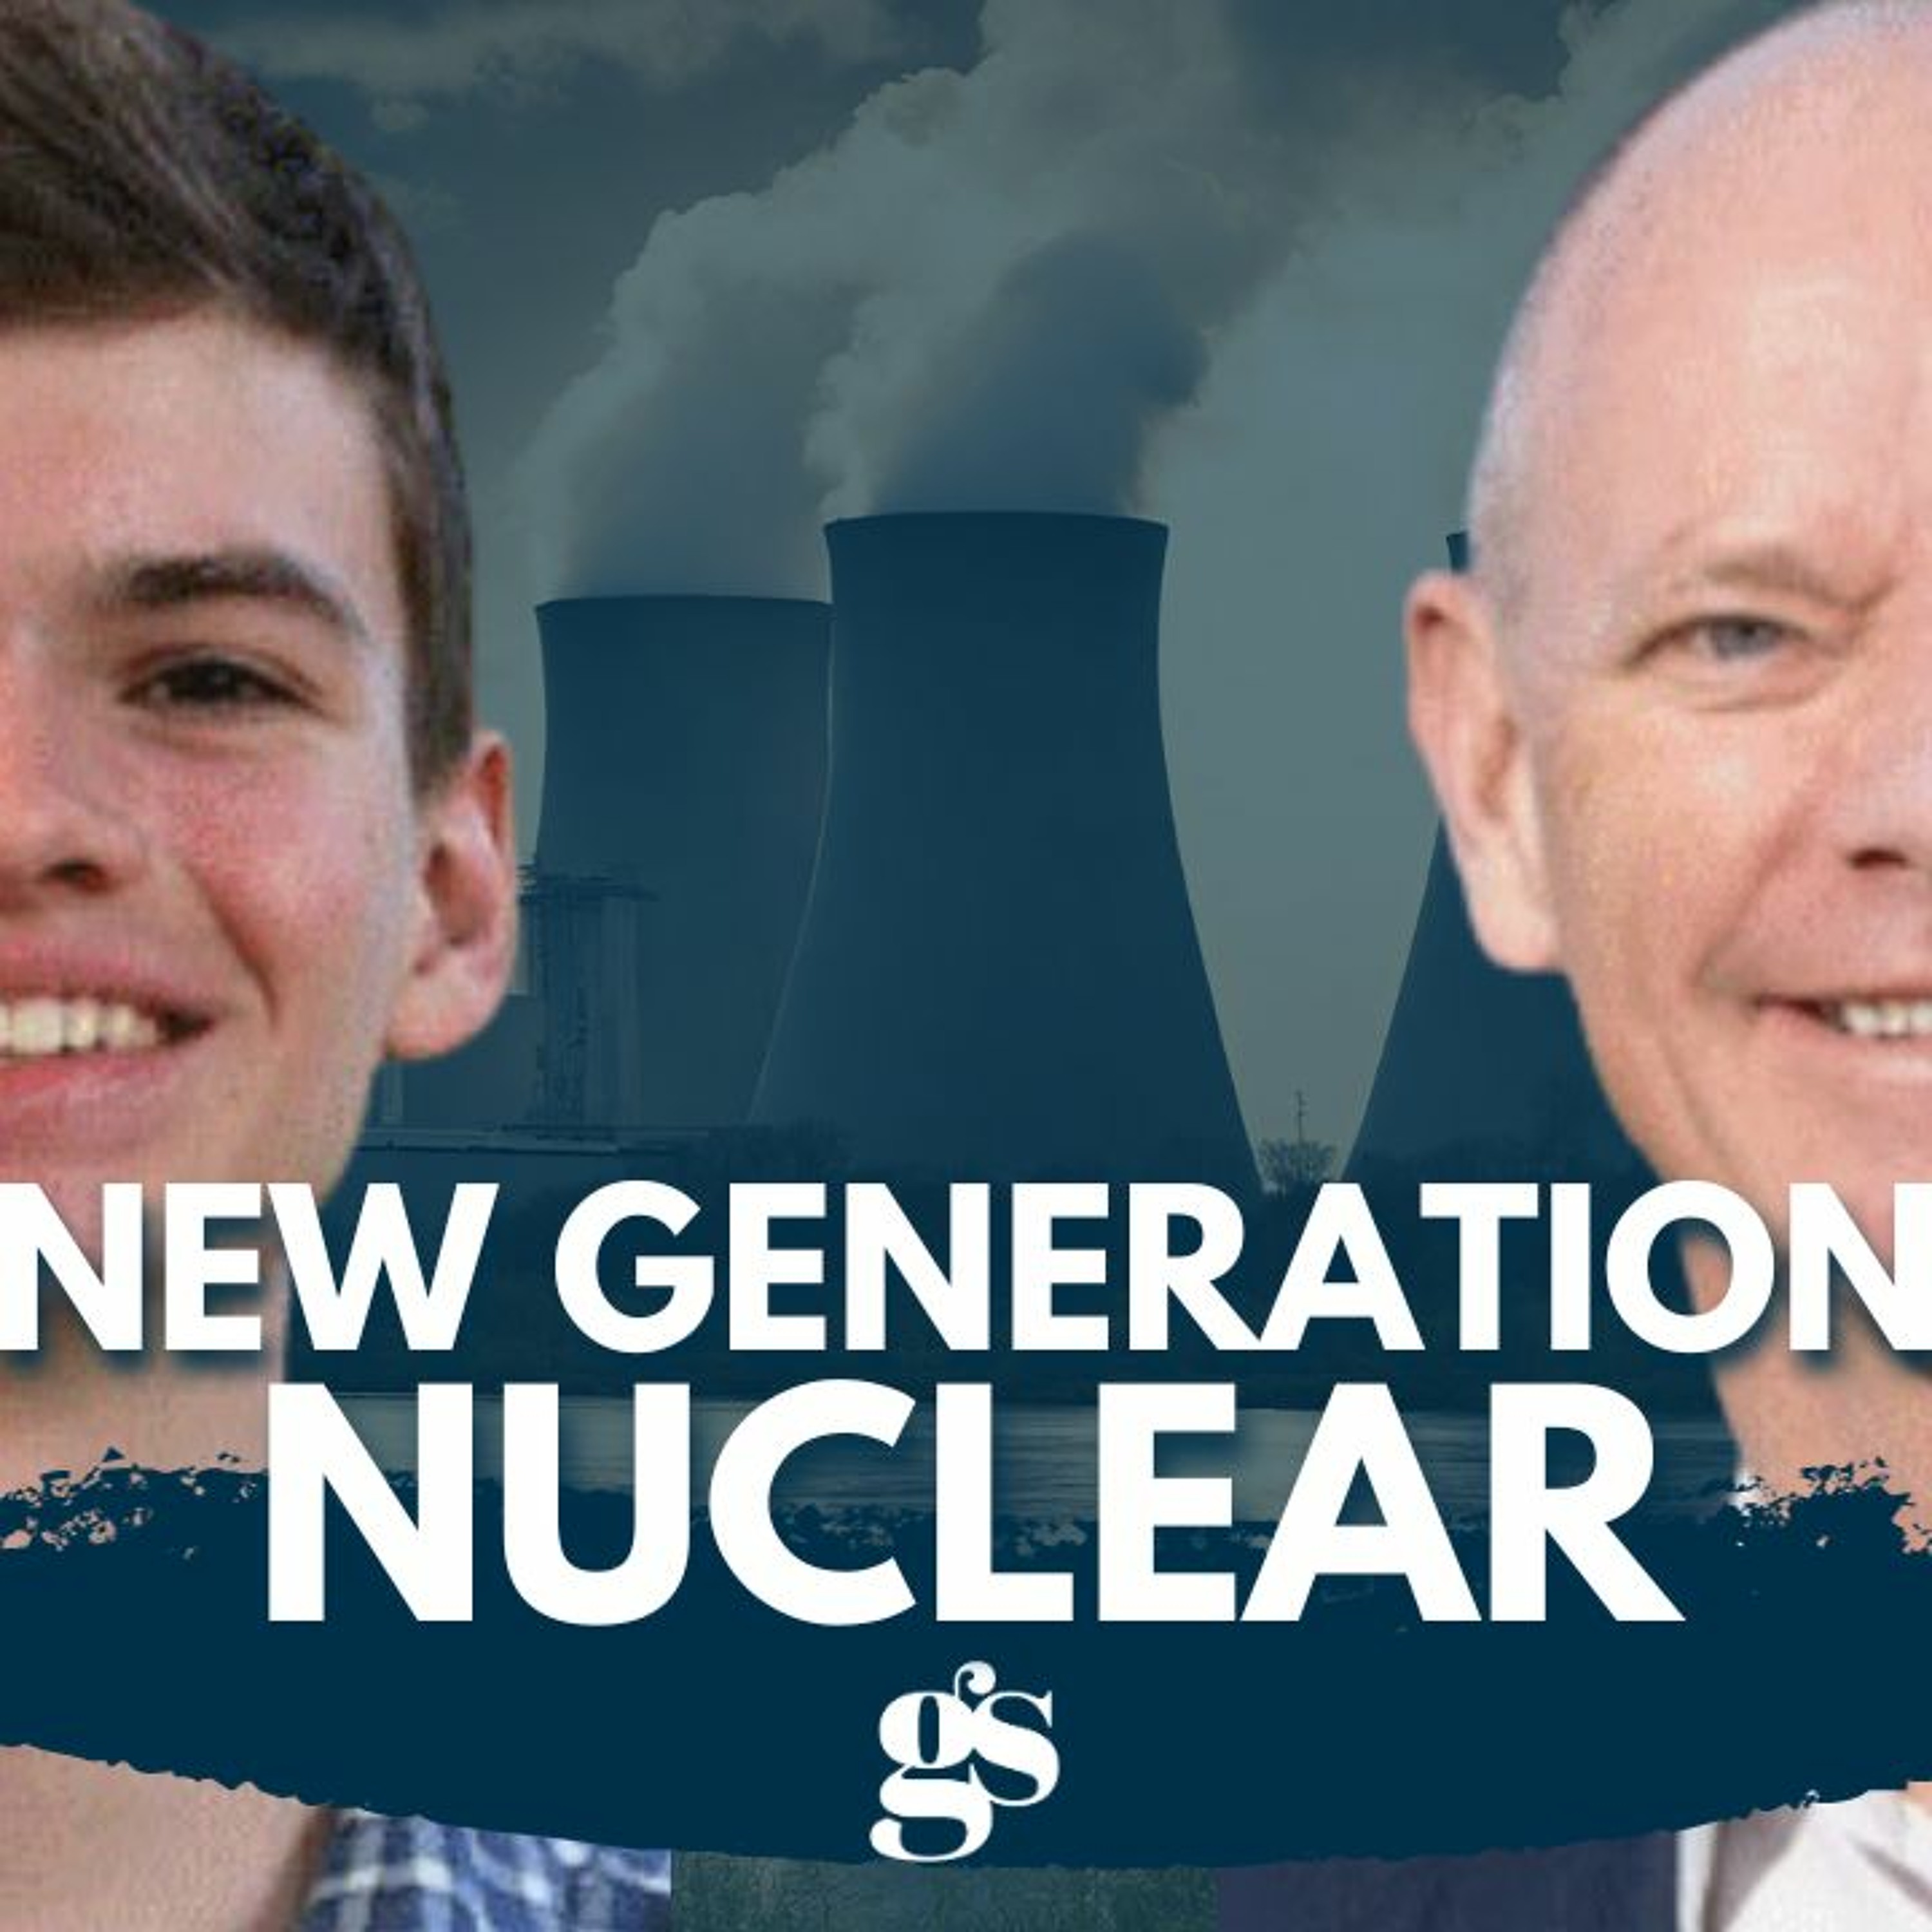 A New Generation For Nuclear | AiP interview with Will Shackell